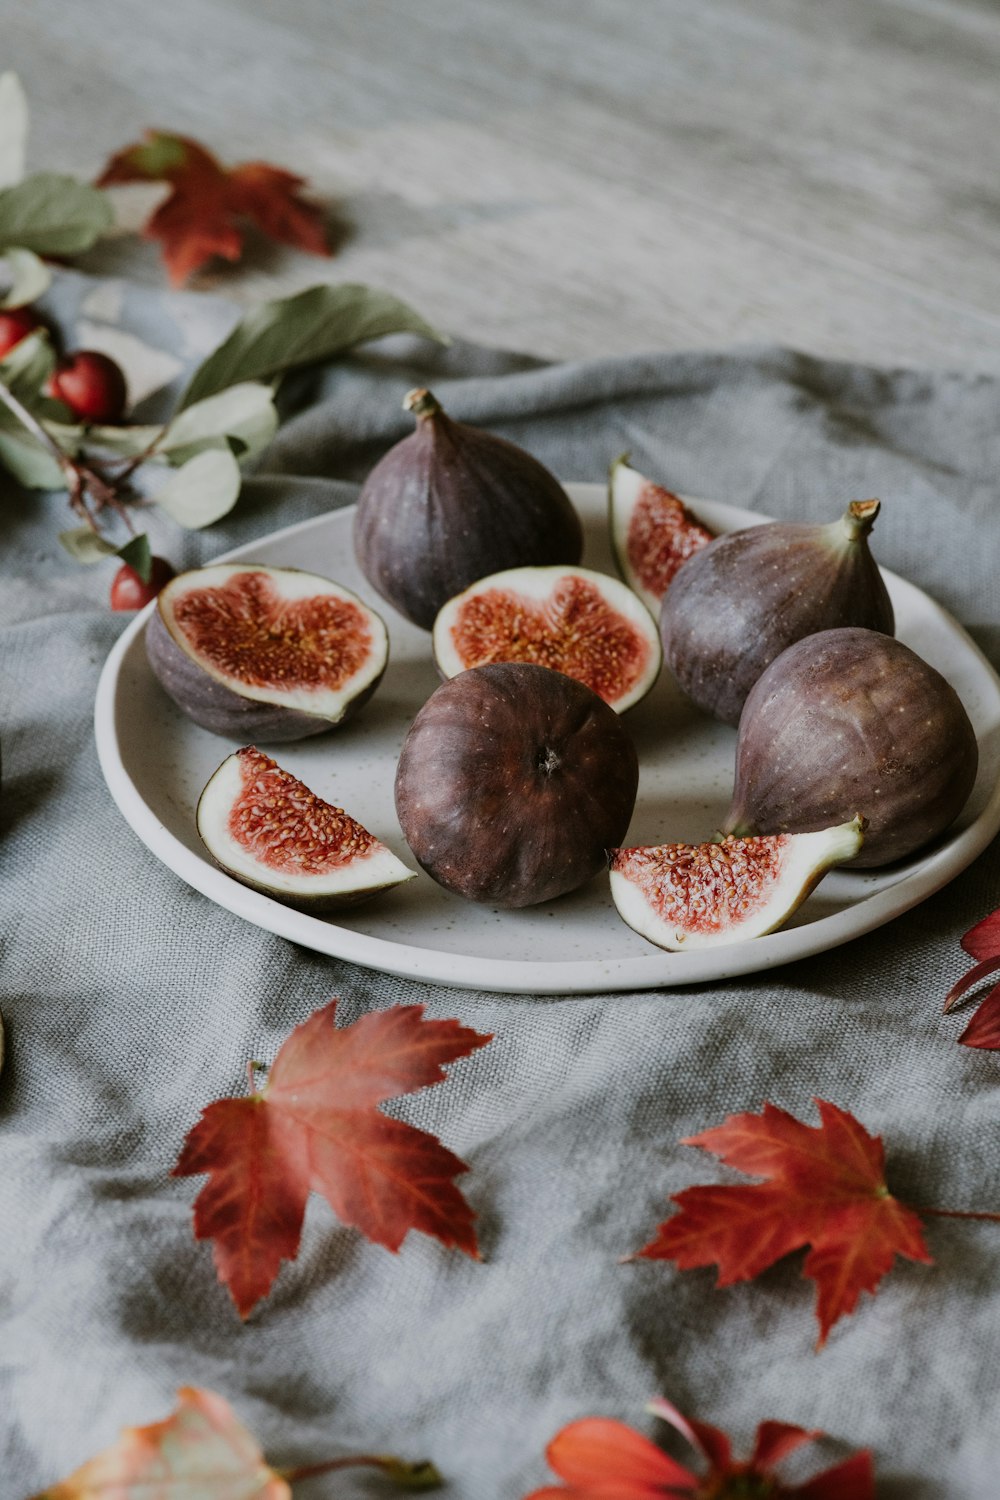 figs and leaves on a plate on a table